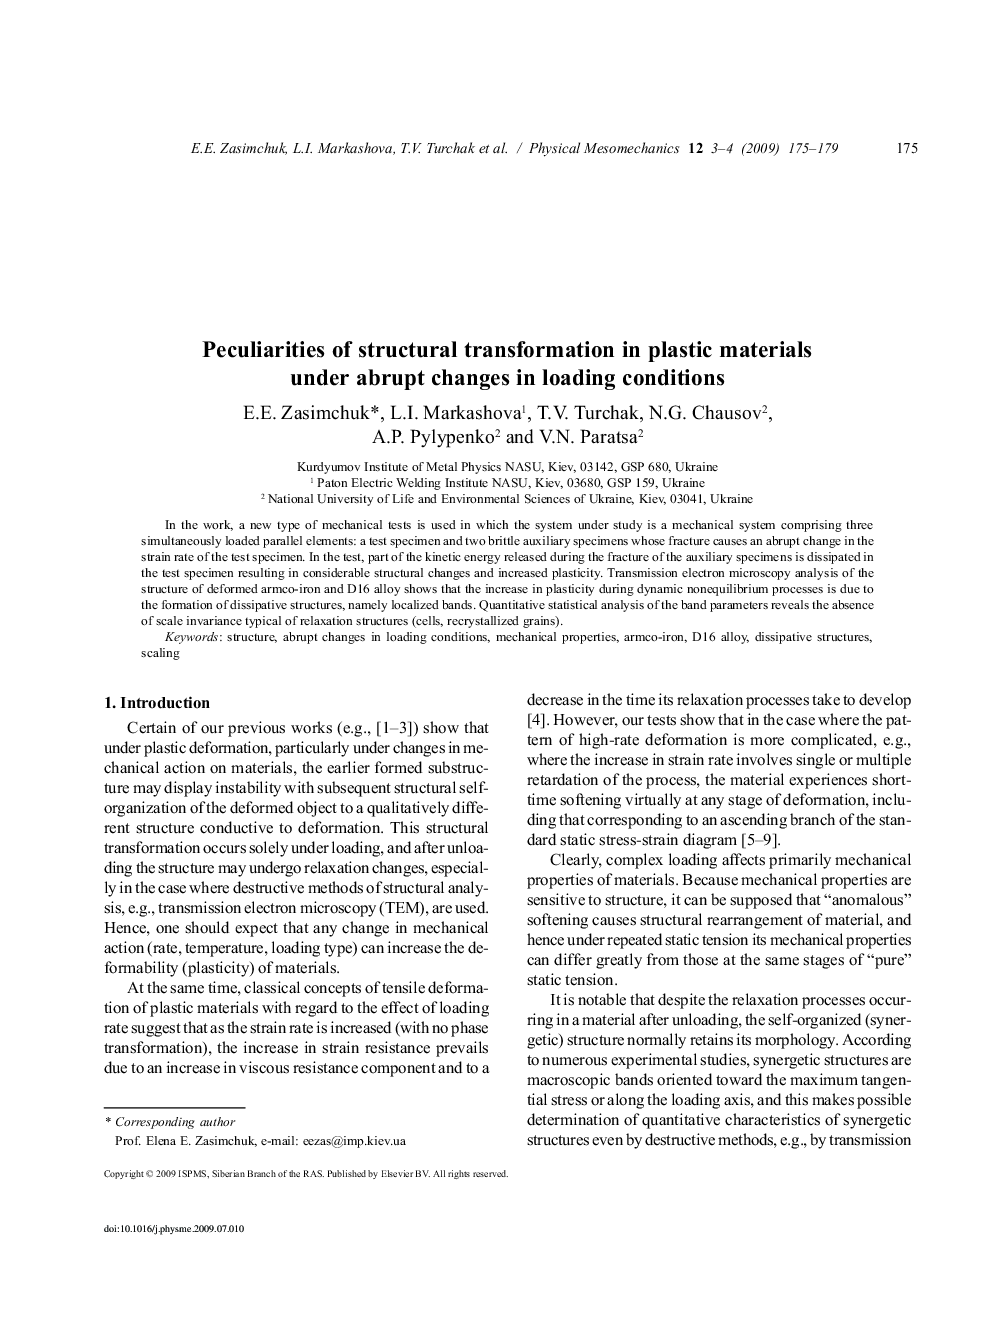 Peculiarities of structural transformation in plastic materials under abrupt changes in loading conditions